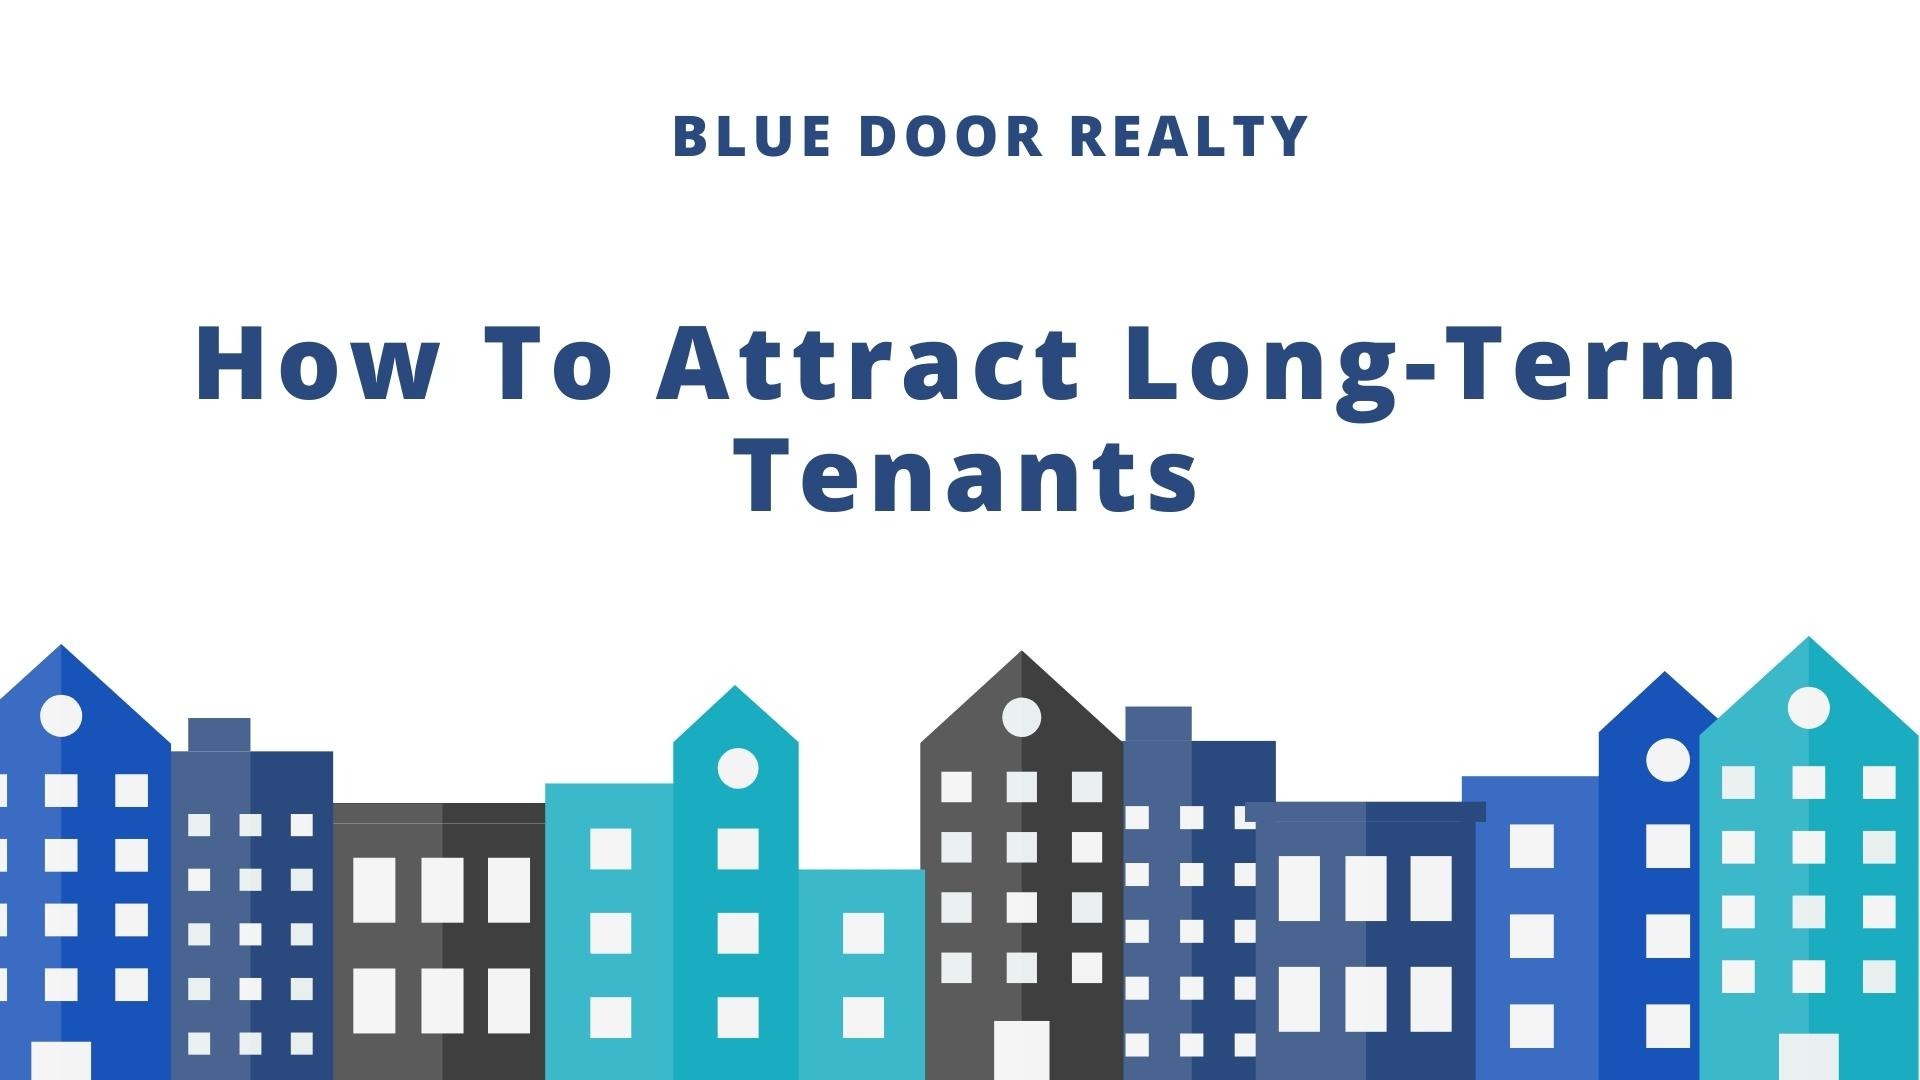 How To Attract Long-Term Tenants